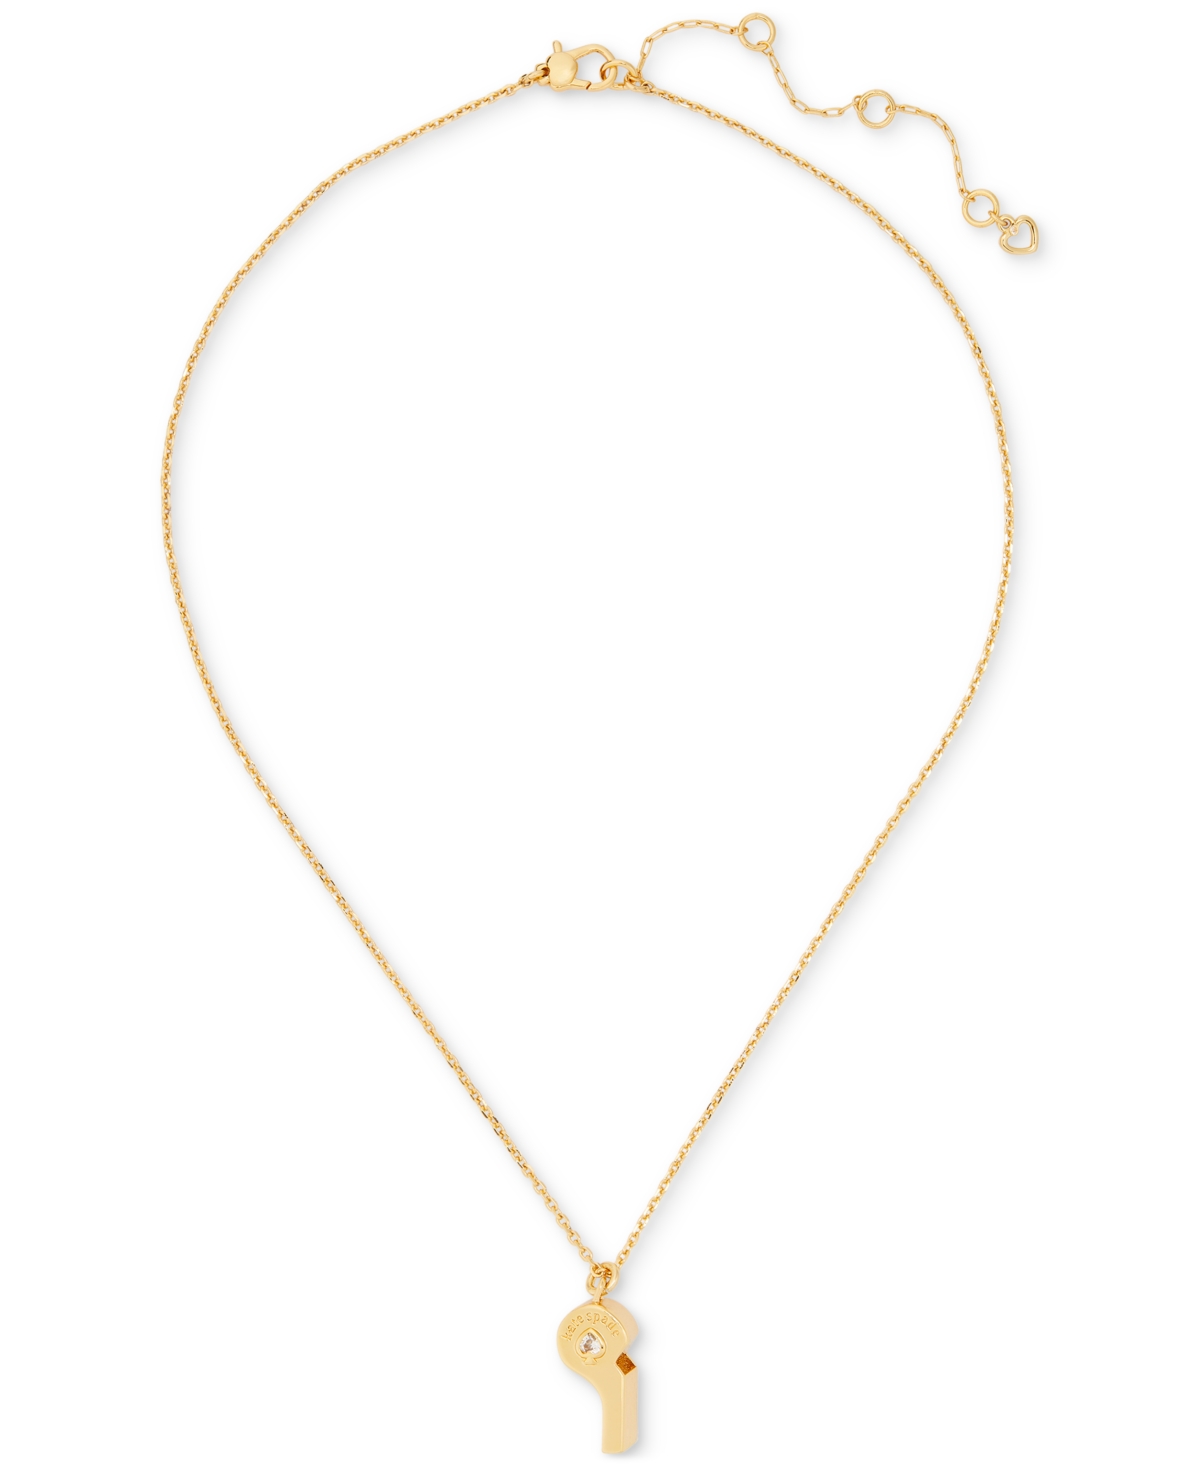 Gold-Tone Cubic Zirconia Spade Whistle Pendant Necklace, 16" + 3" extender - Gold.